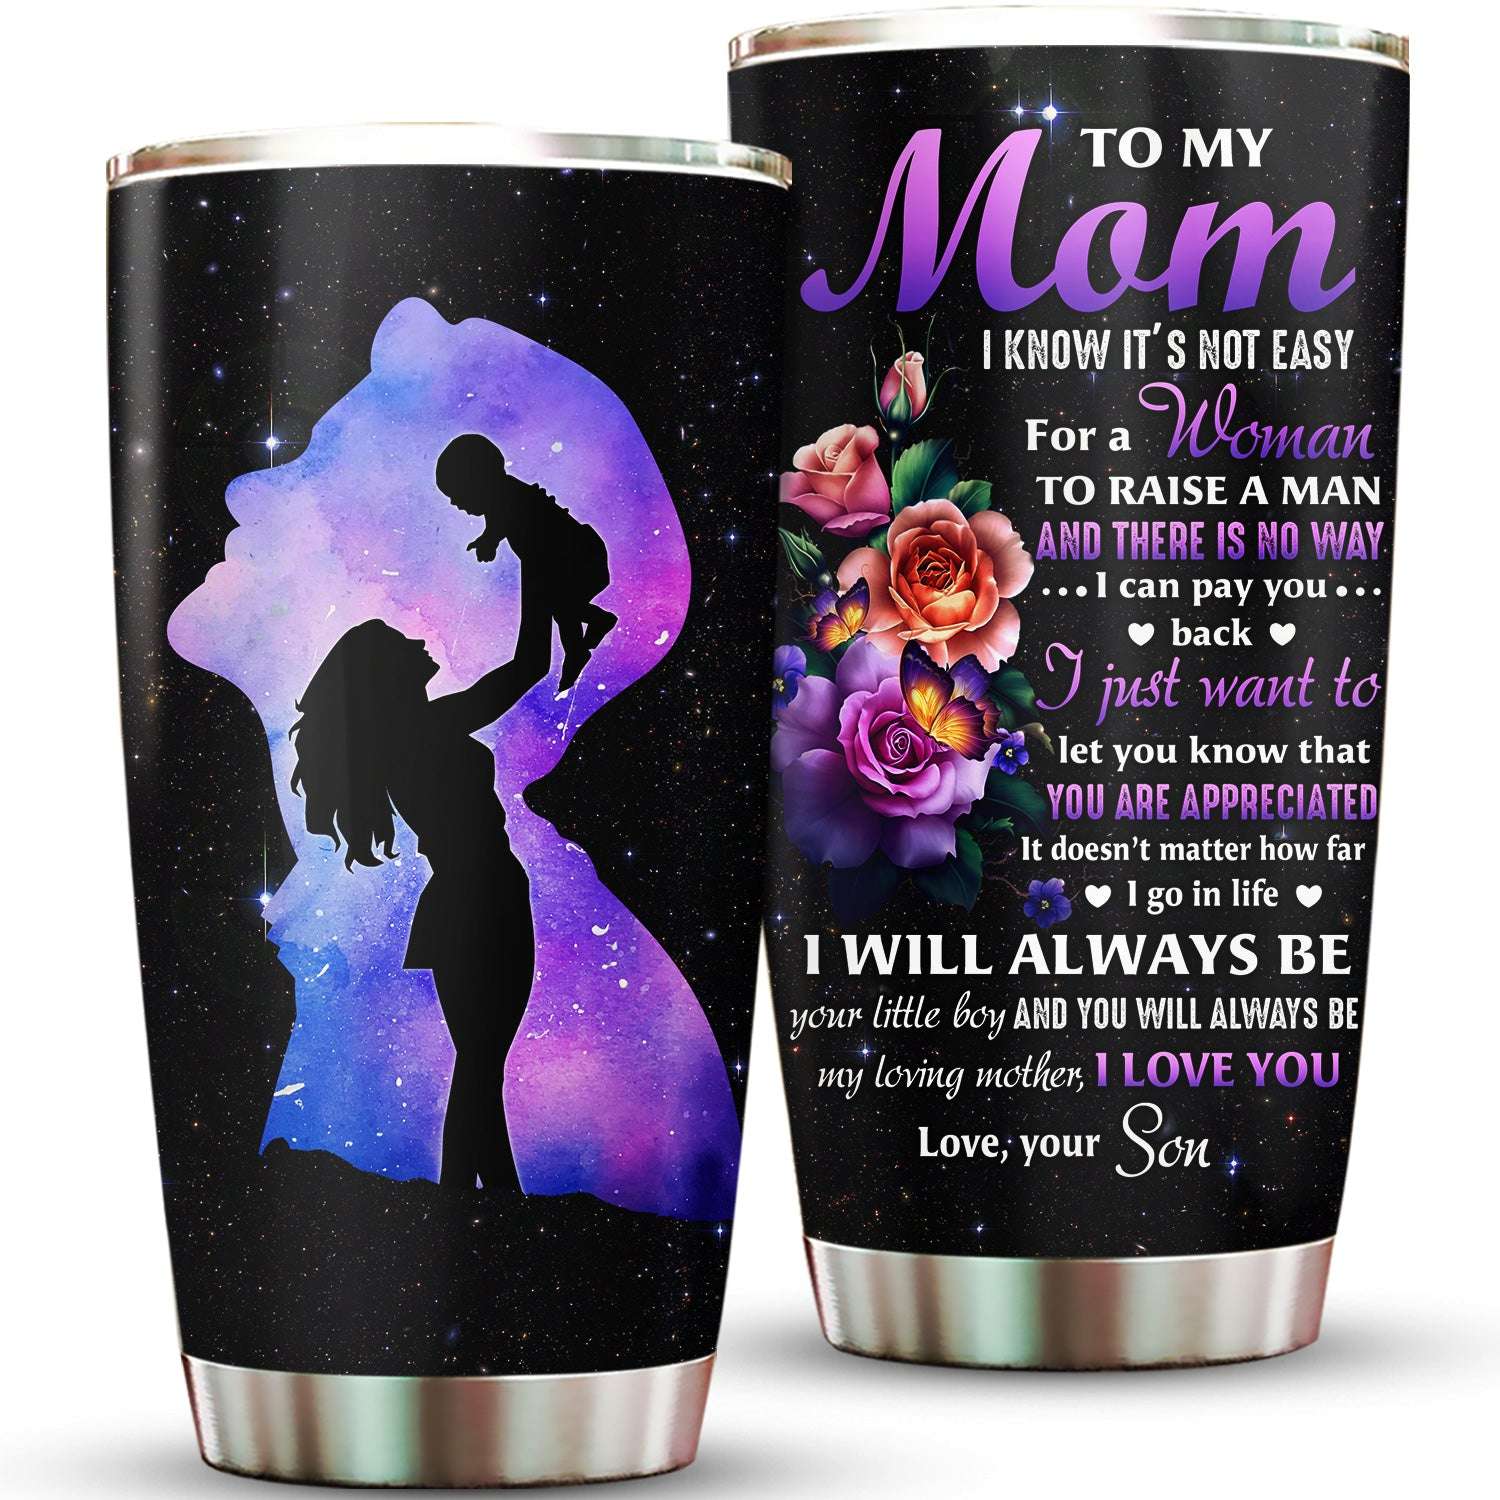 https://images.leecyprint.com/wp-content/uploads/2023/03/To-My-Mom-I-Will-Always-Love-You-Mom-Tumbler-1.jpg